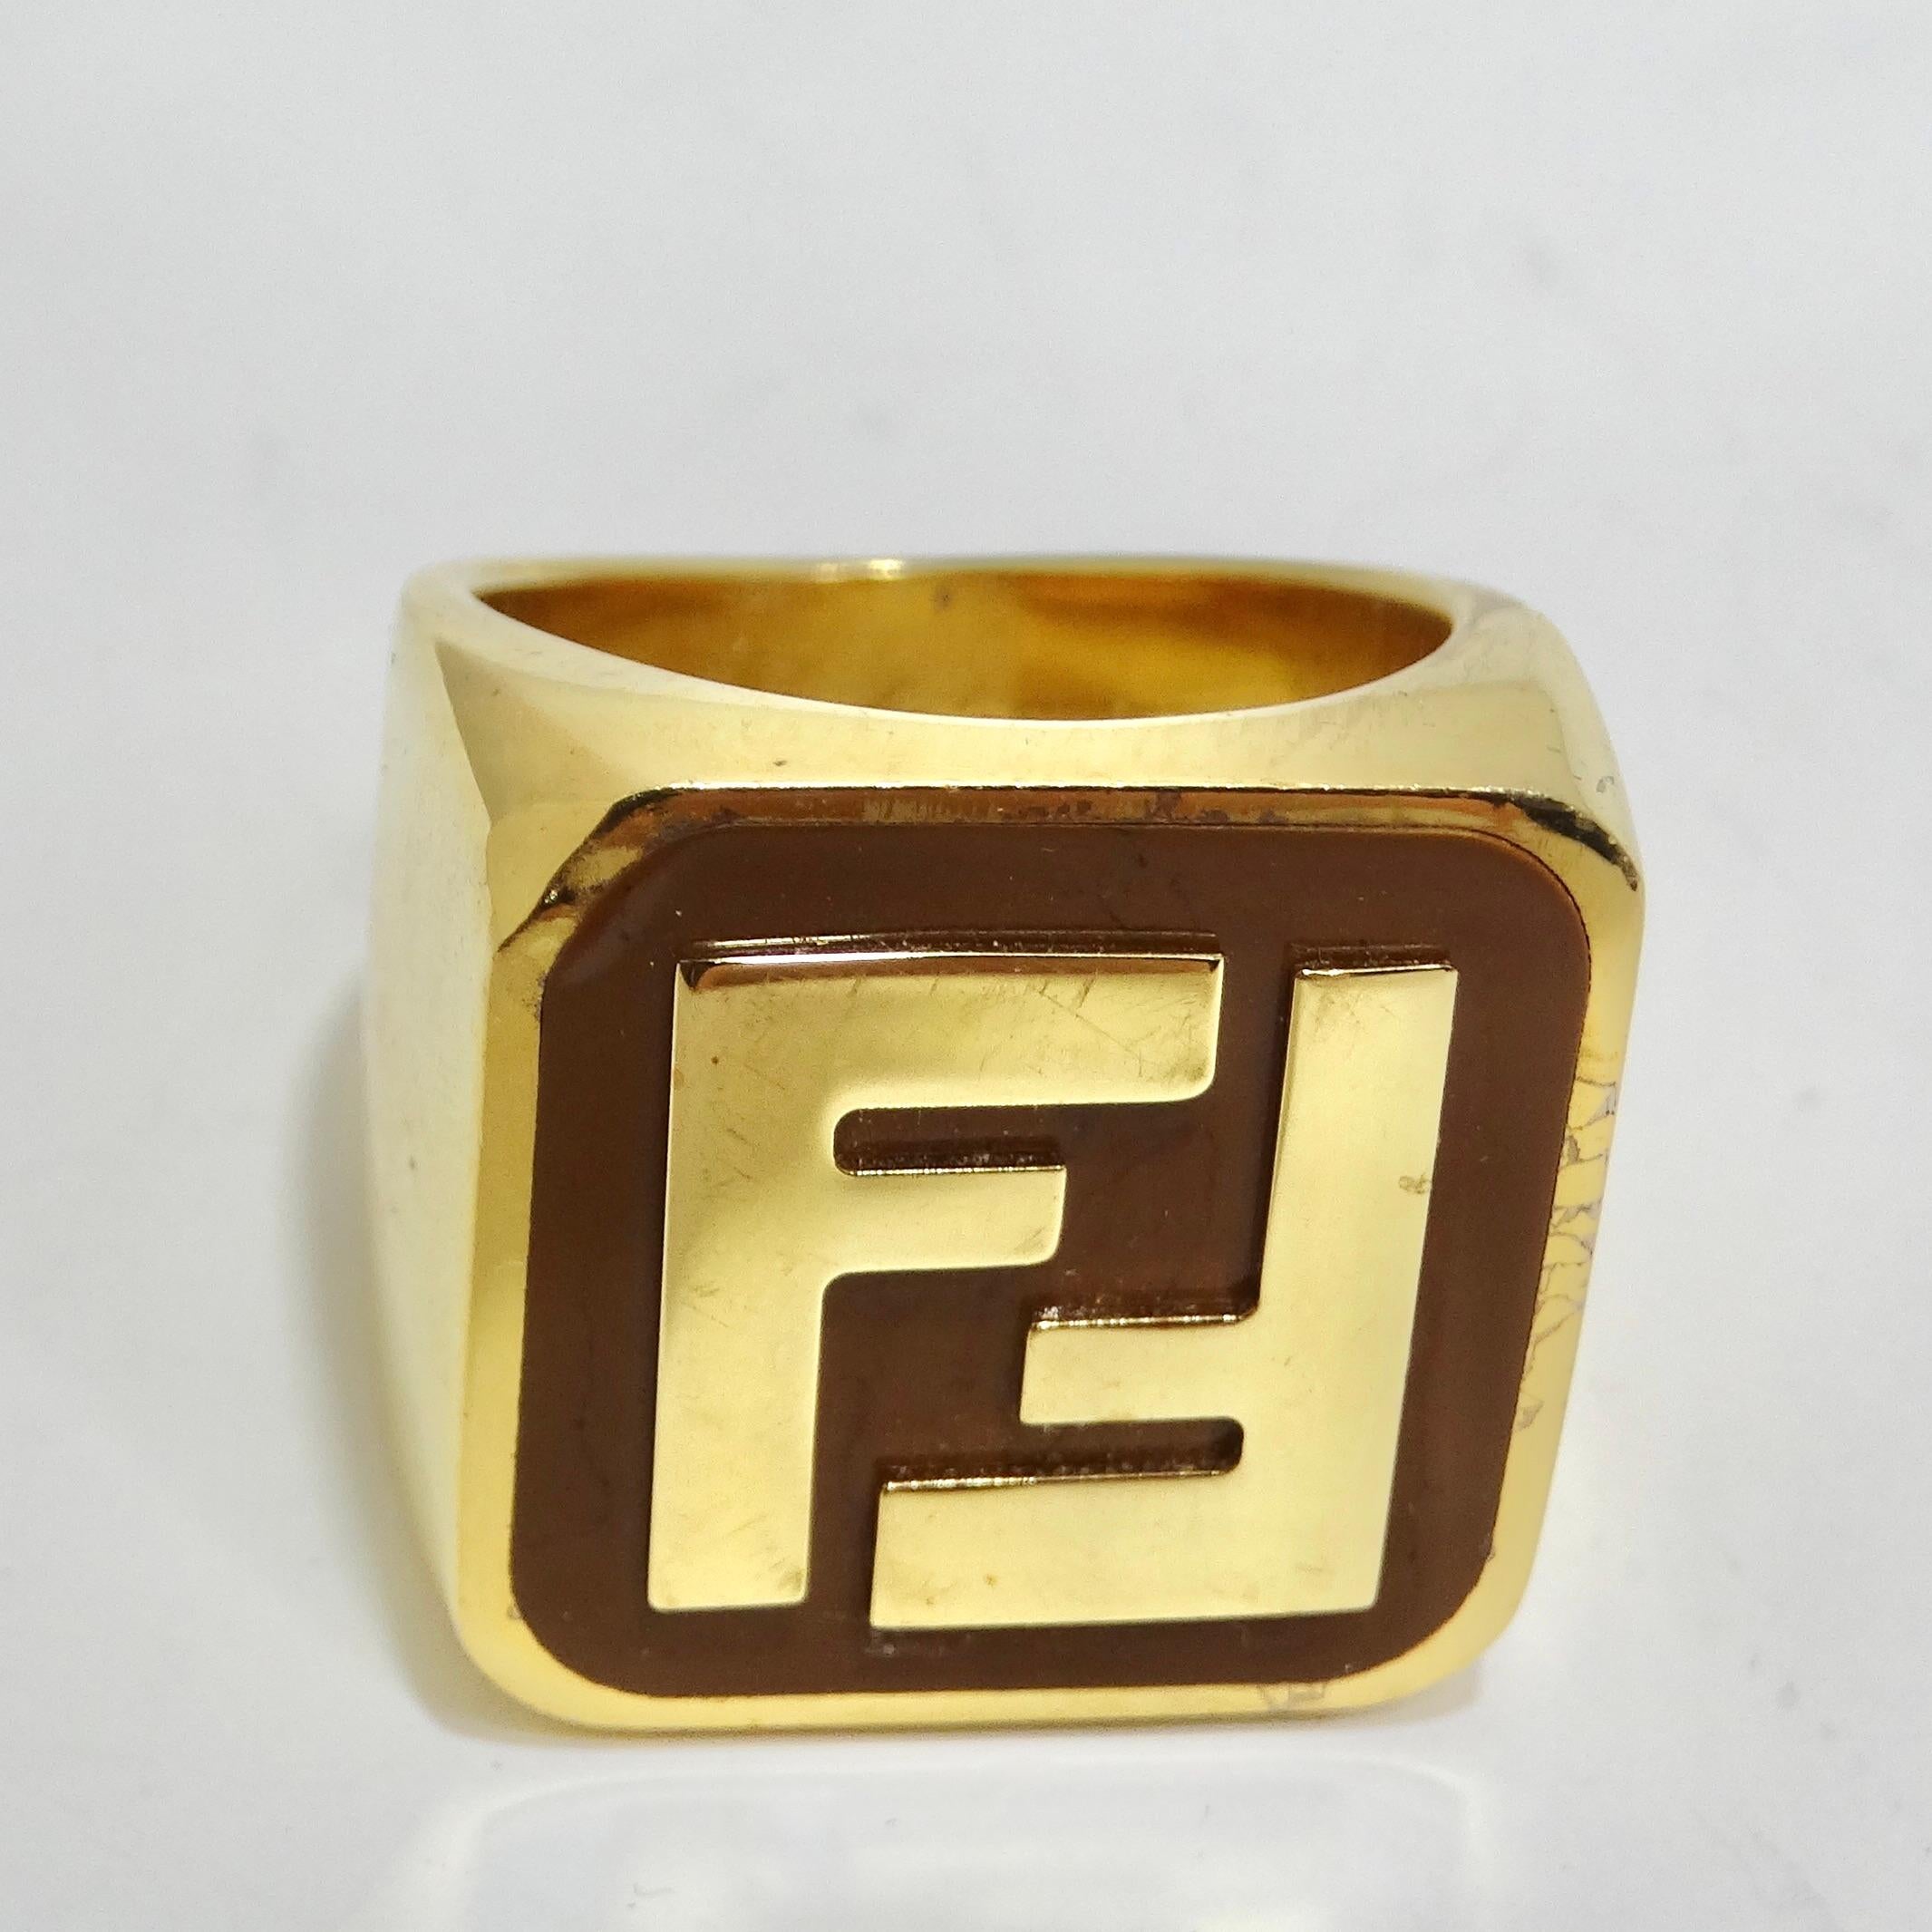 Elevate Your Style with the Fendi FF Logo Gold Tone Ring - A Timeless and Versatile Unisex Accessory! This vintage Fendi ring showcases the unmistakable FF logo in the center. It's a statement piece that reflects the brand's heritage and reputation